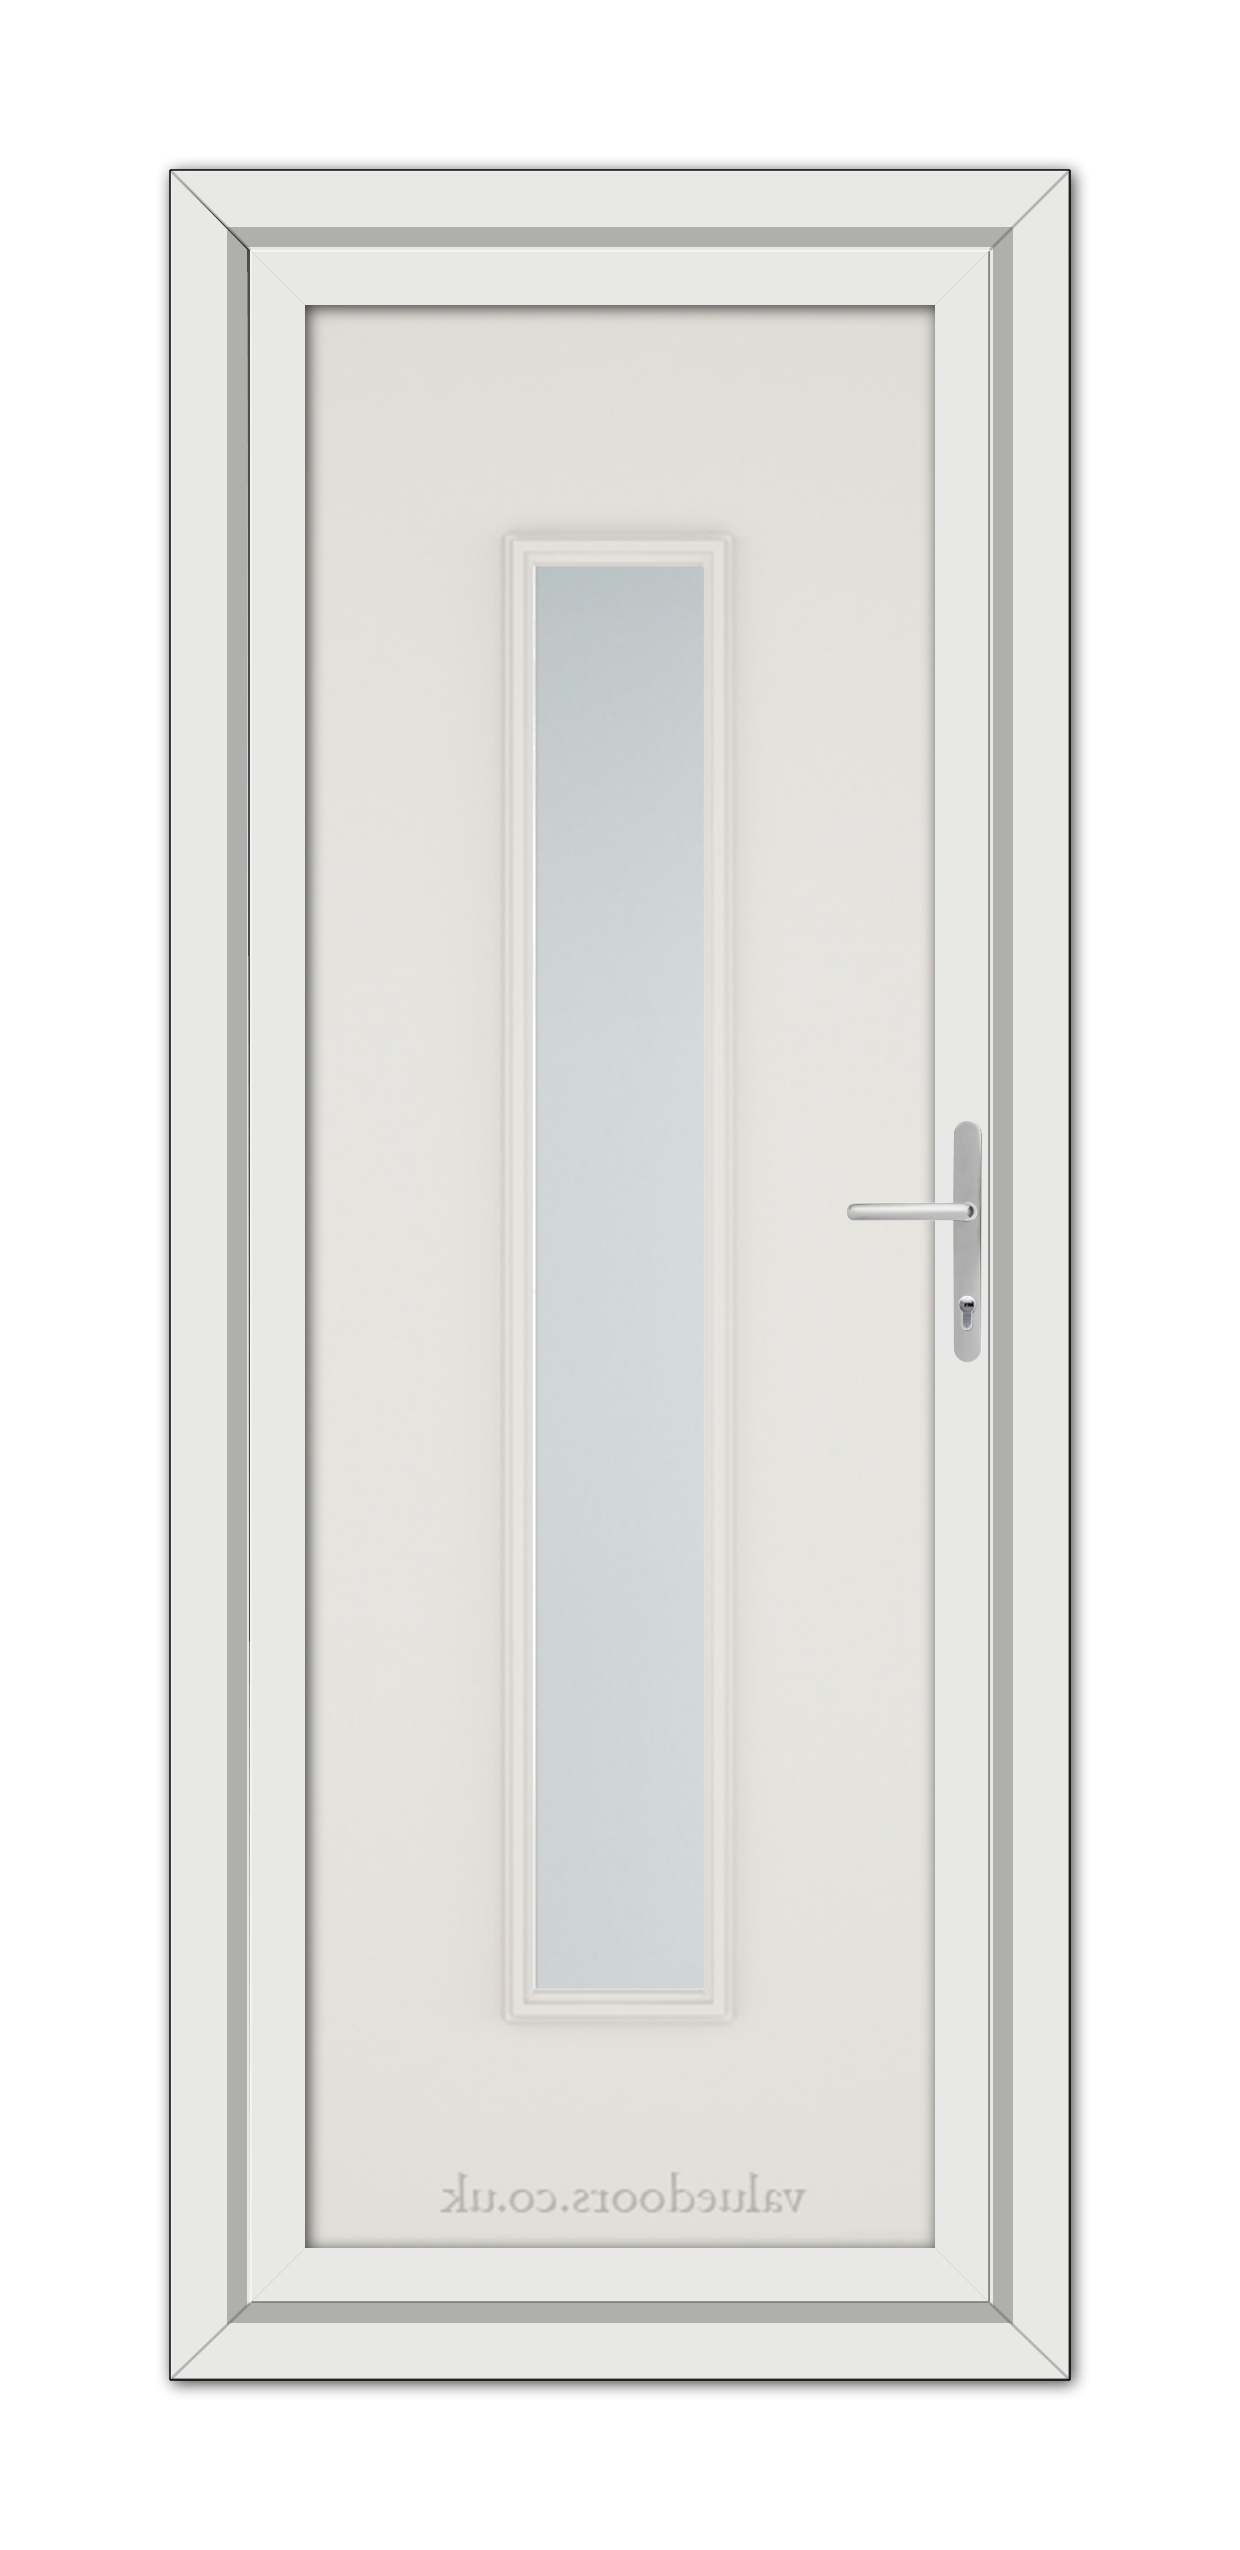 A White Cream Rome uPVC Door with a glass panel.